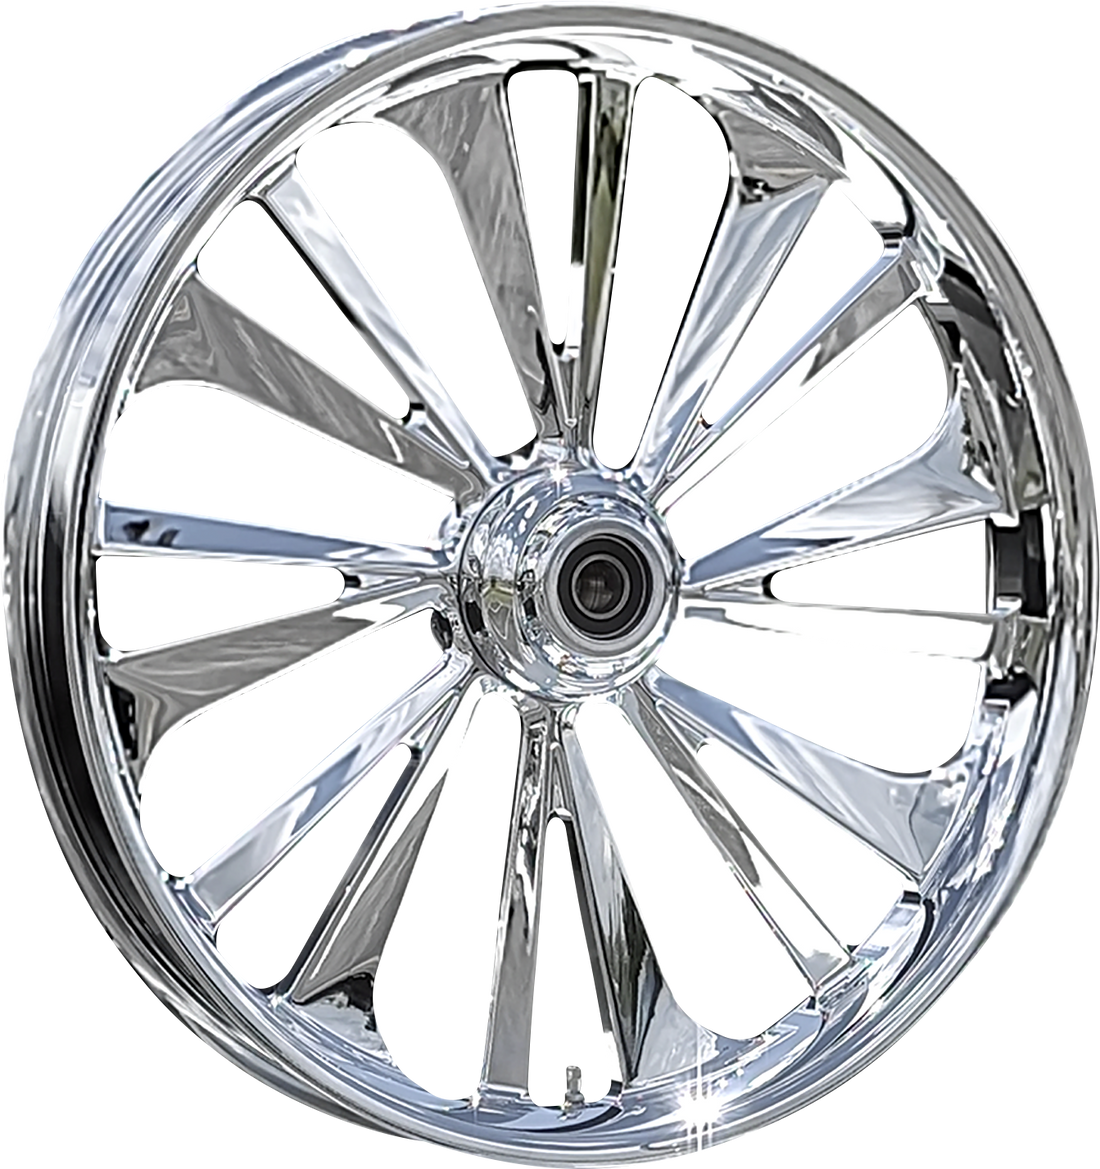 0213-0879 - RC COMPONENTS Wheel - Dillinger - Front - Single Disc w/ABS - Chrome - 21"x3.50" - FLH 213HD032A21138C